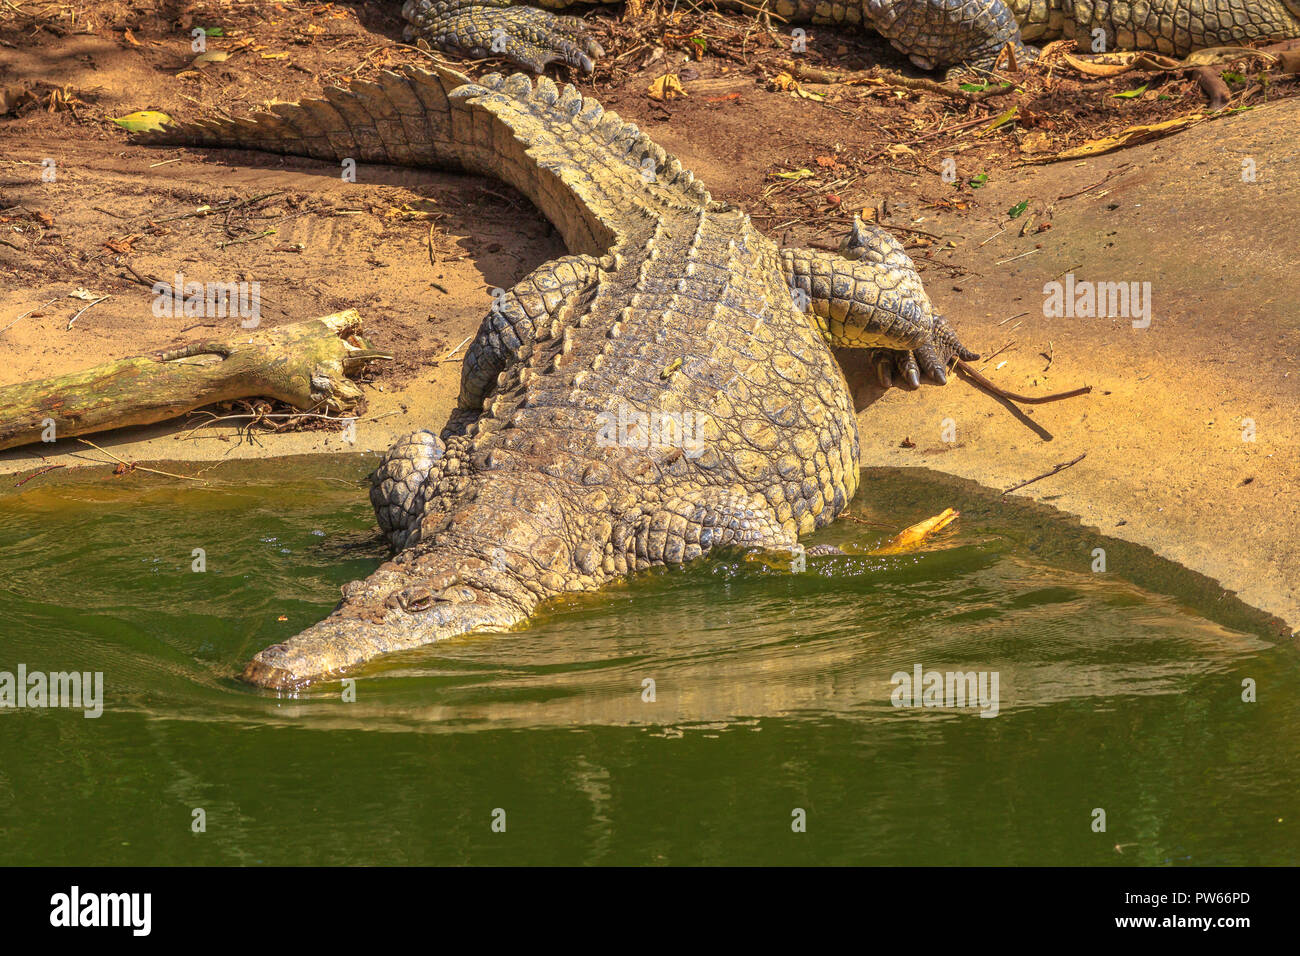 African Crocodiles entering the water in Ezemvelo KZN Wildlife. Nile Crocodile in St Lucia Estuary within iSimangaliso Wetland Park, South Africa, one of the top Safari Tour destinations. Stock Photo